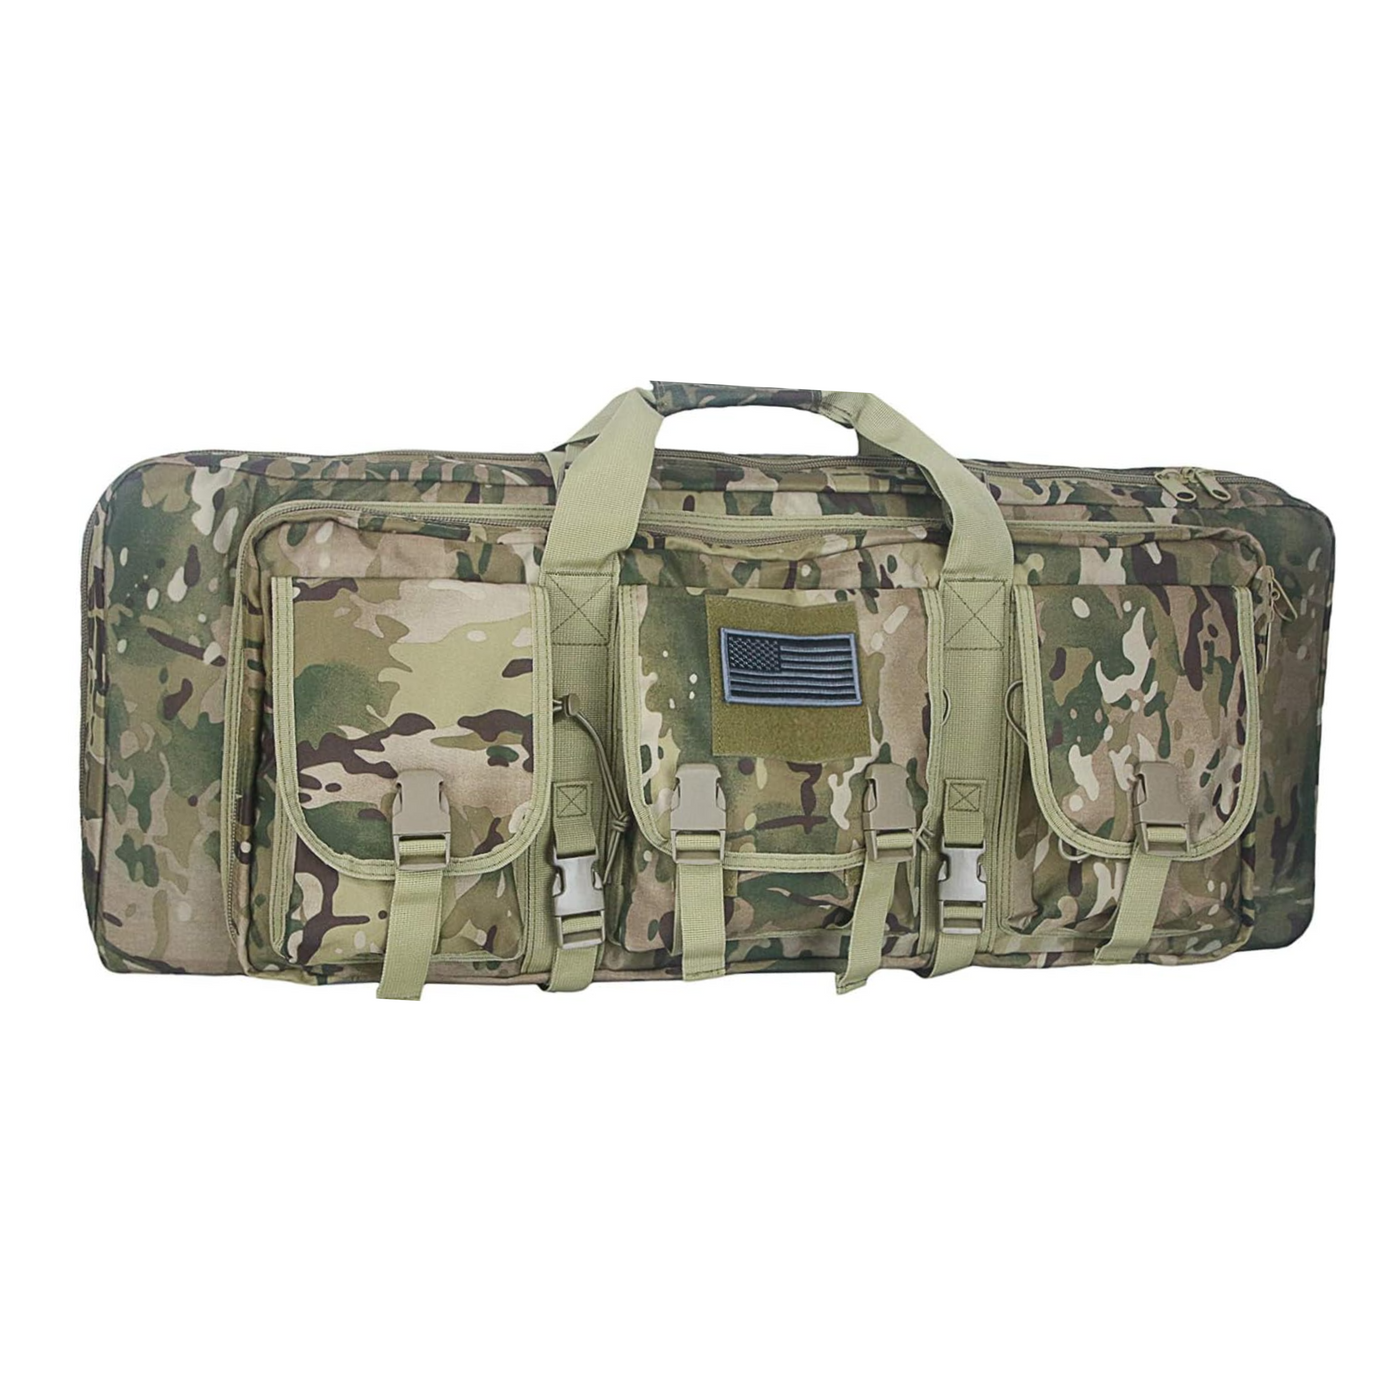 Tactical gun bag with waterproof and padded features for 42-inch American Classic rifles, ideal for hunting